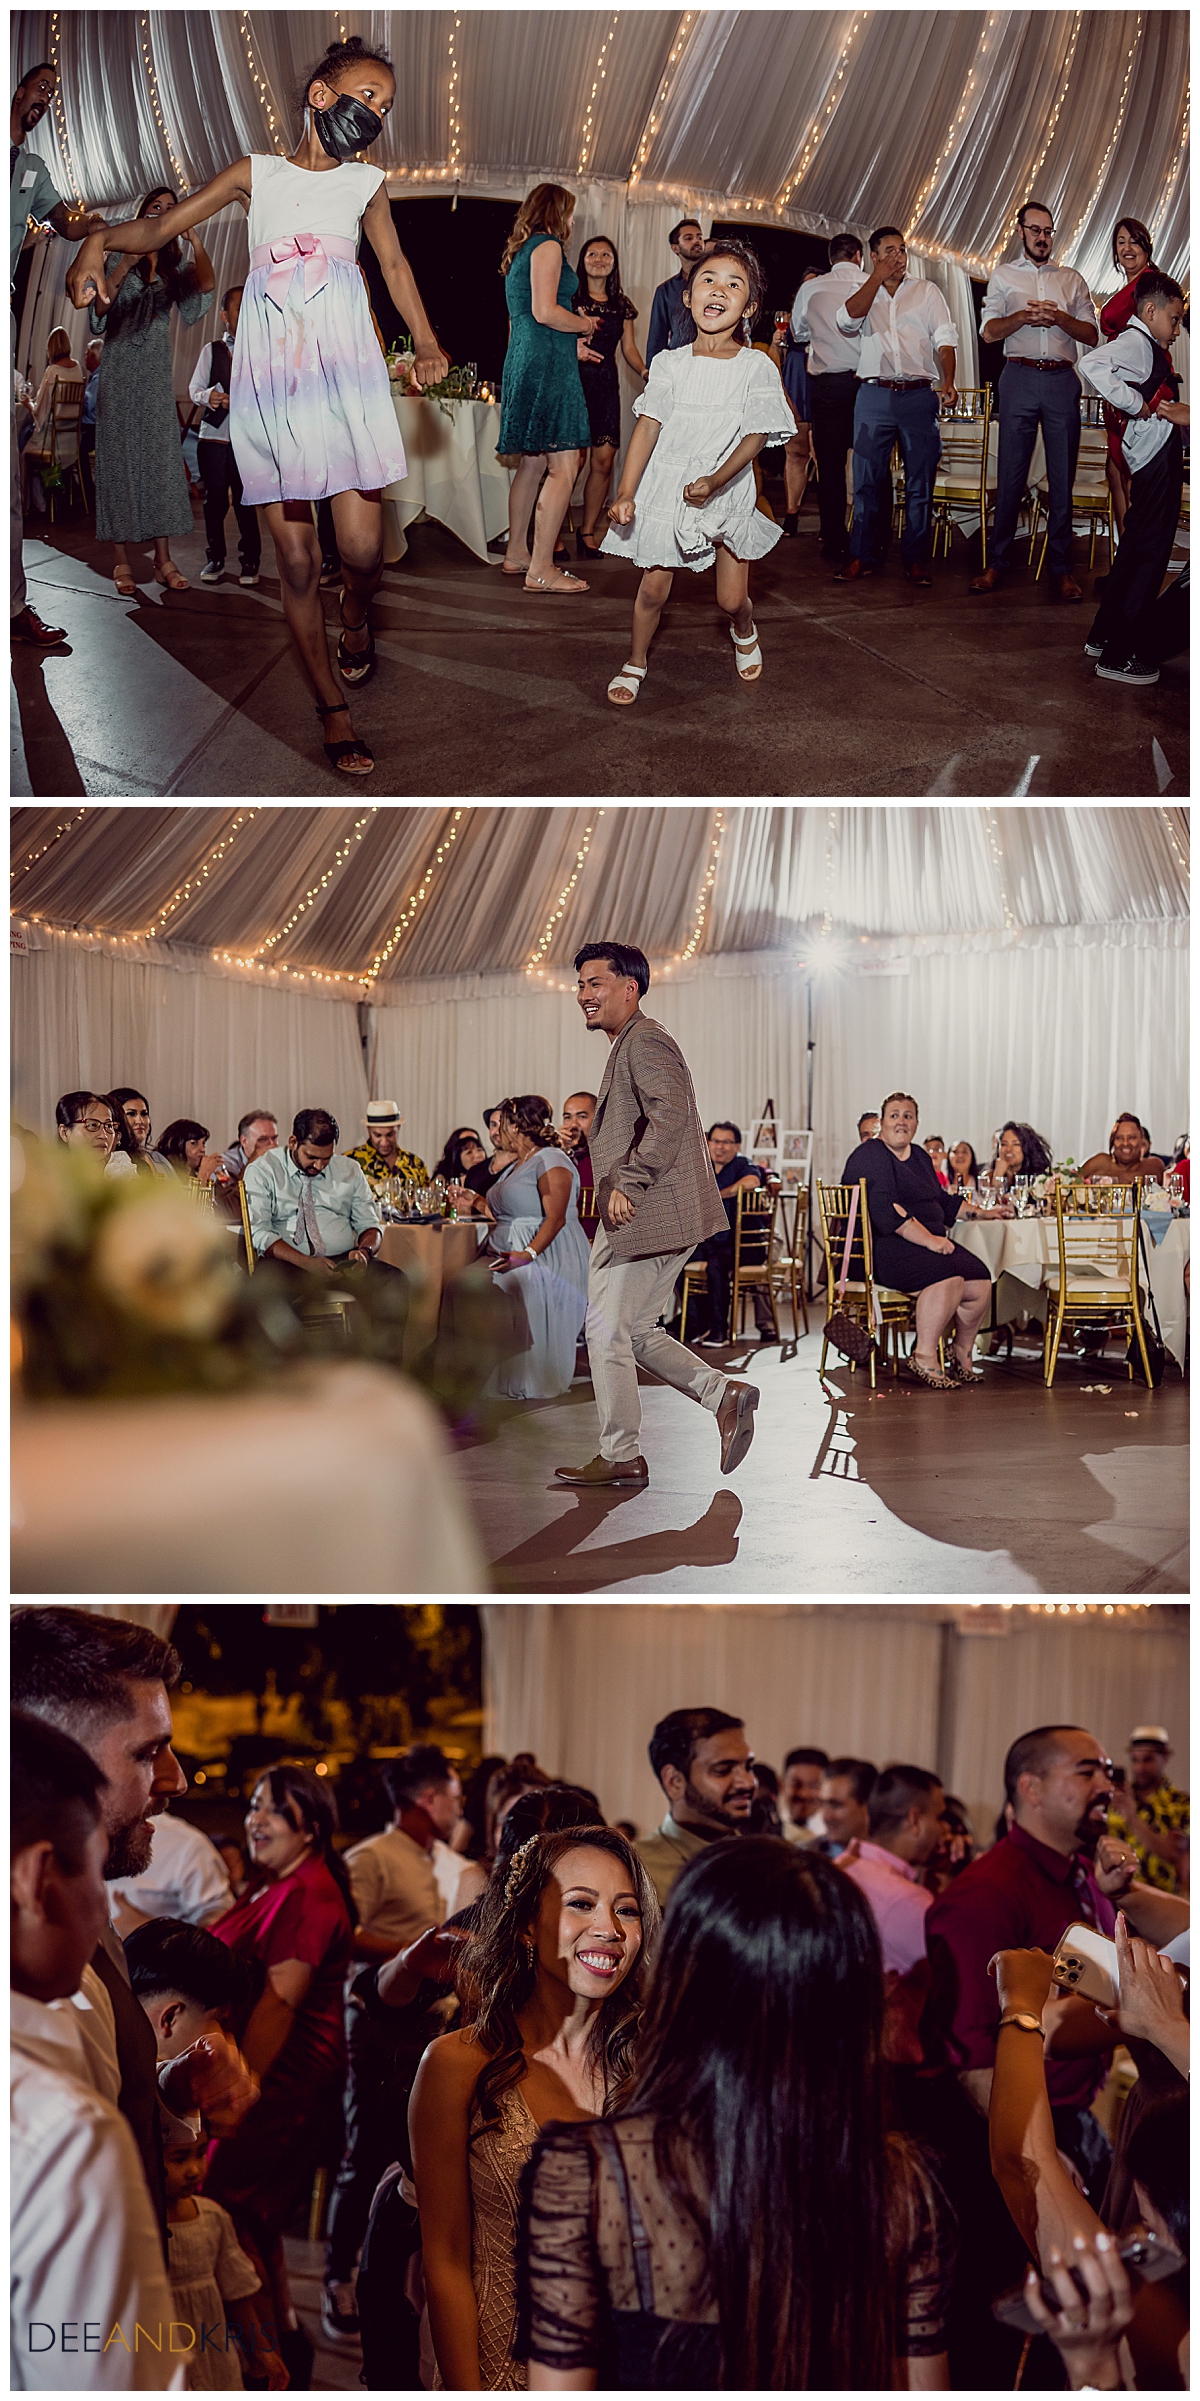 Three images of wedding guests dancing and talking.